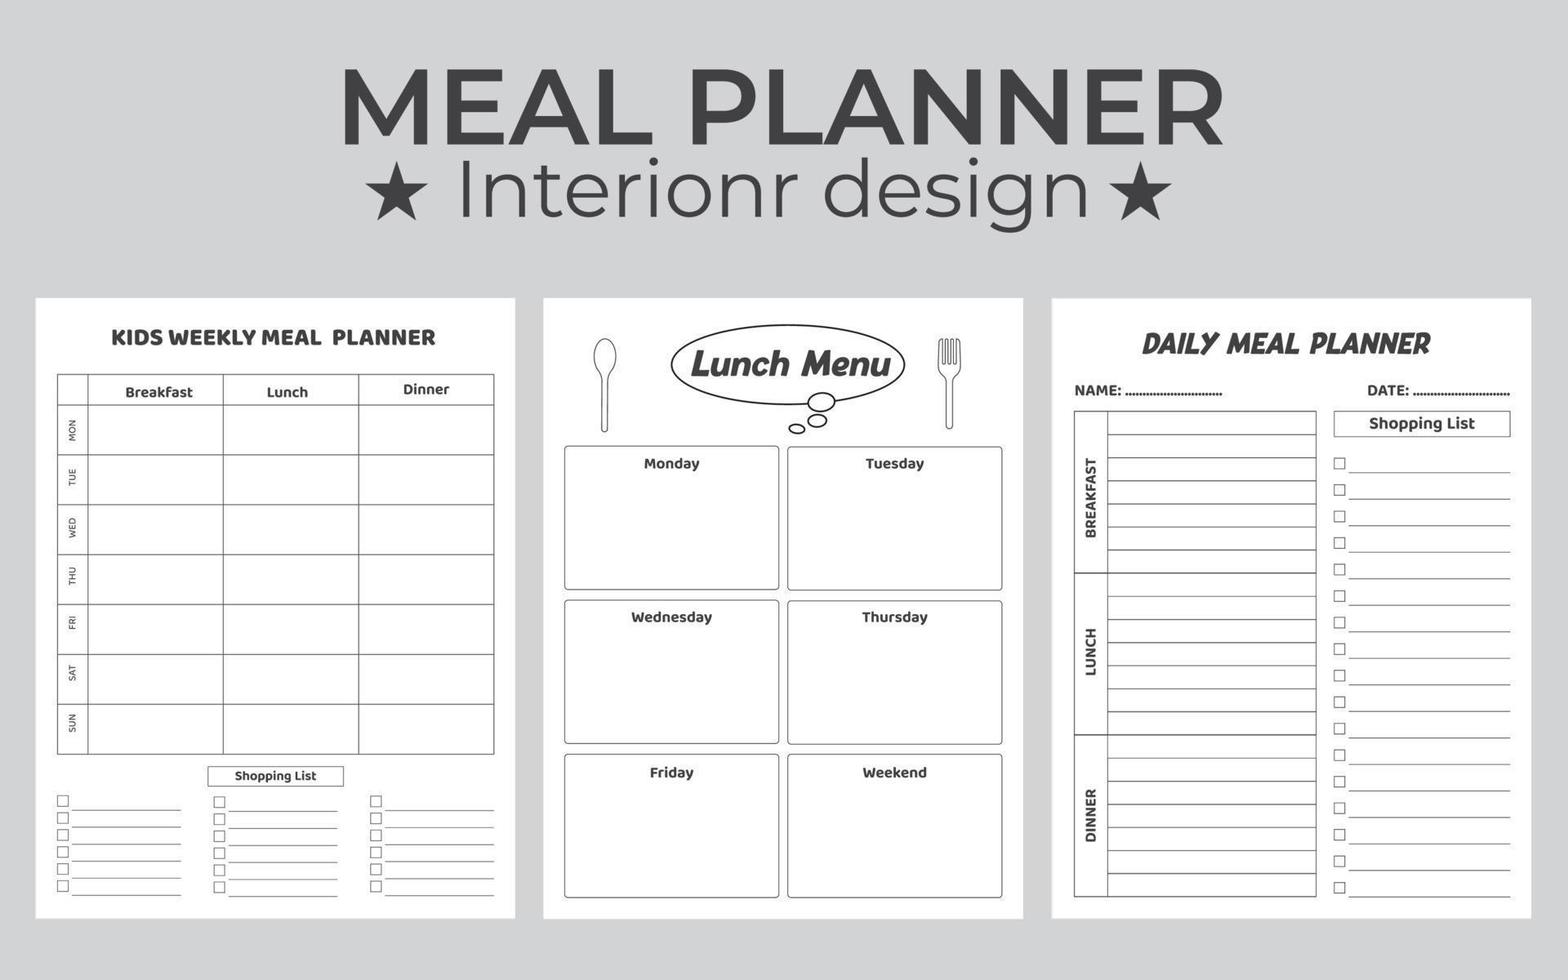 Minimalist Meal Planner Printable Template. Planner For Weekly And Daily Meals For Breakfast, Lunch, Dinner And Snacks. vector